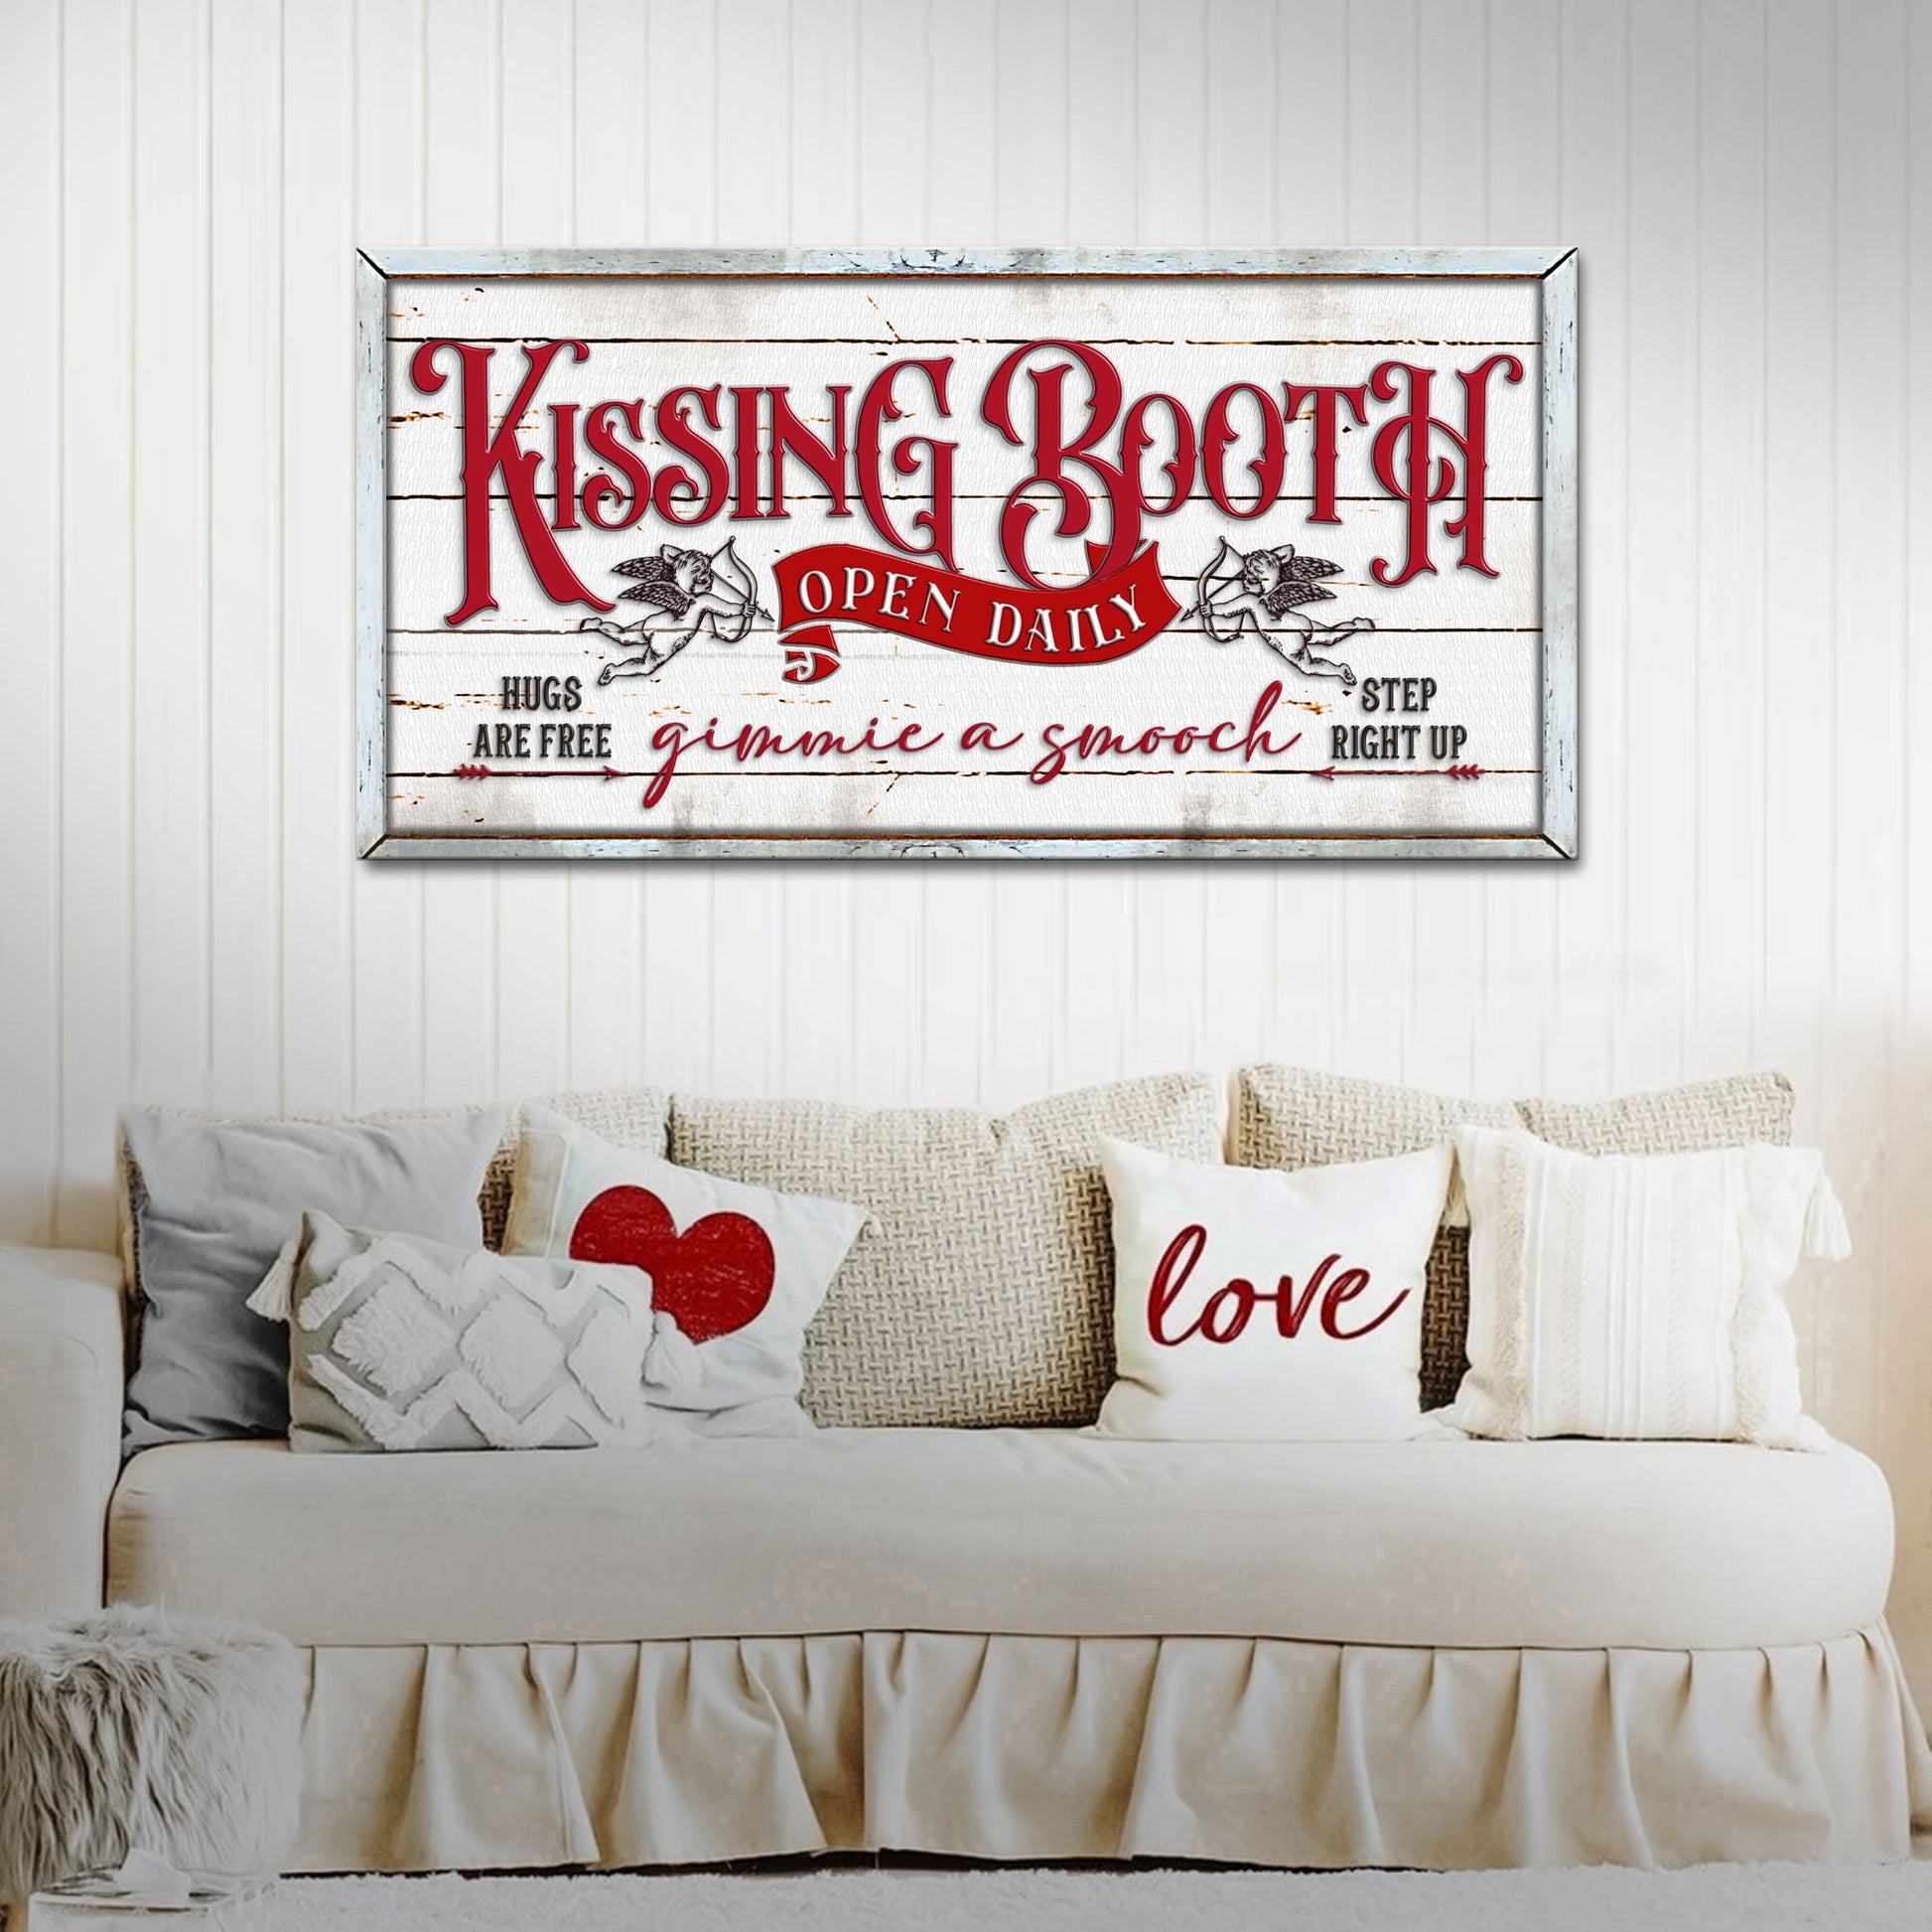 Vintage Rustic Kissing Booth Sign Style 2 - Image by Tailored Canvases